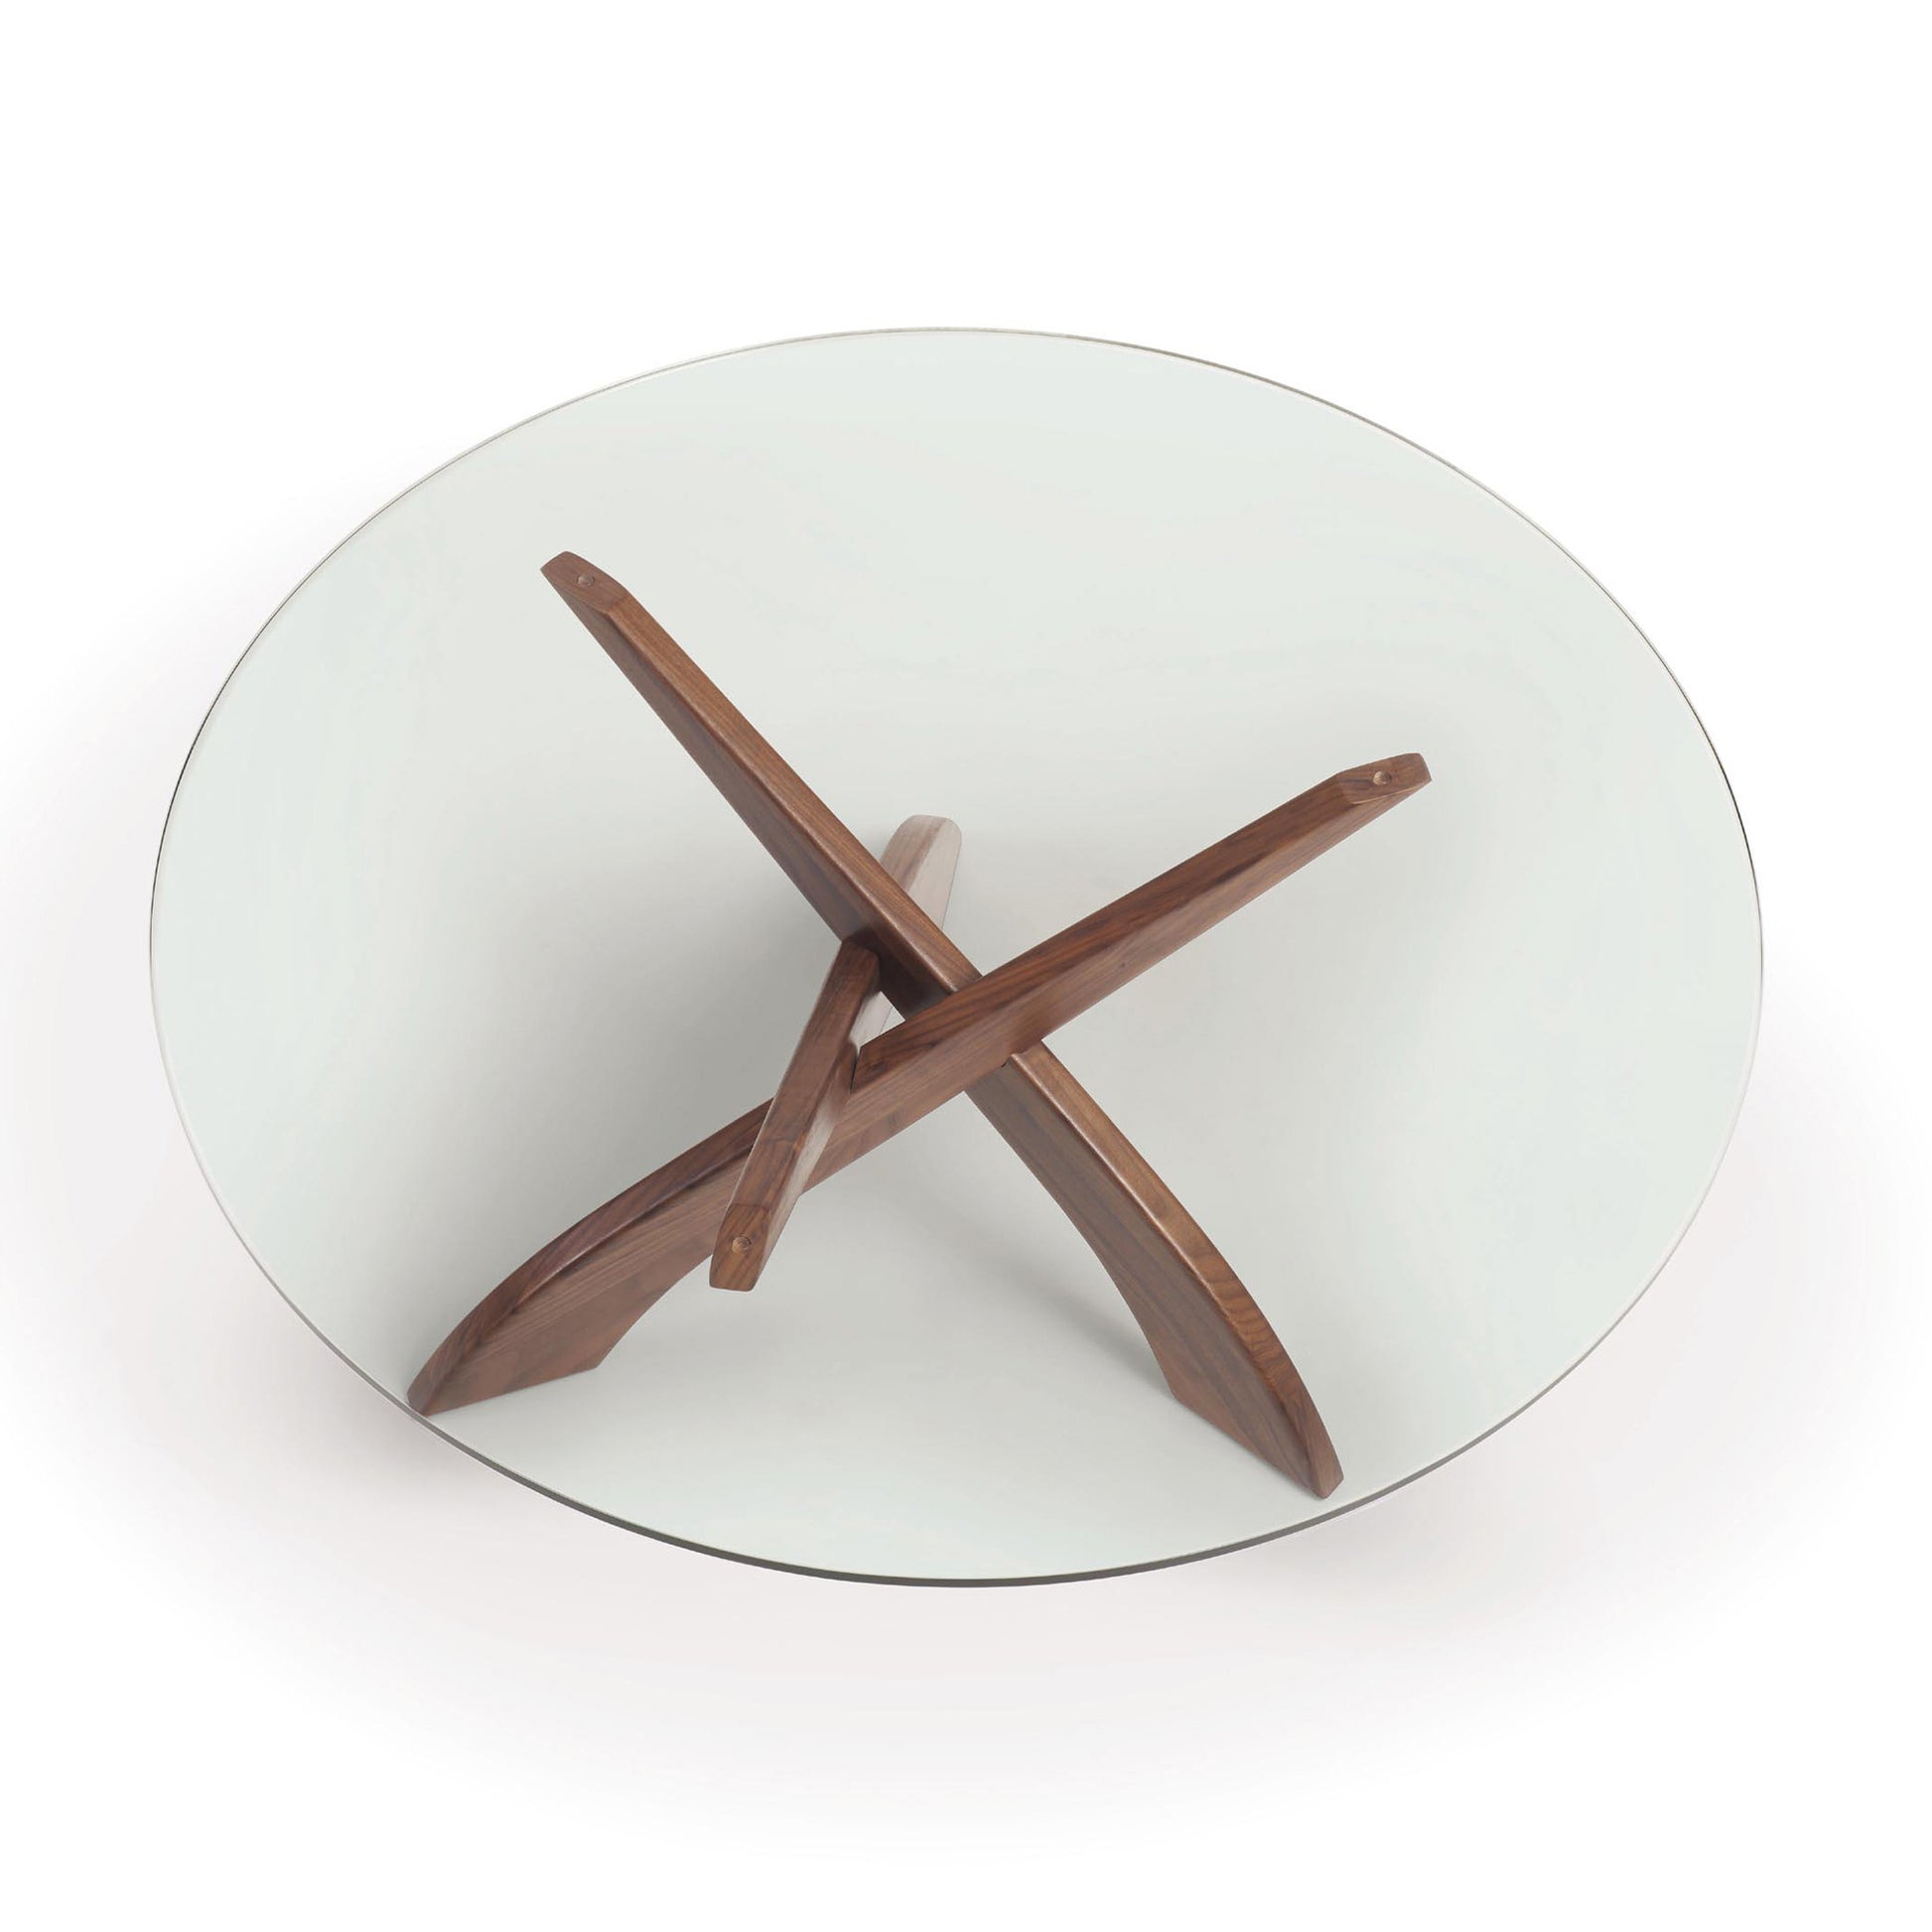 An Entwine Round Coffee Table from Copeland Furniture for your living room with a wooden cross on top.